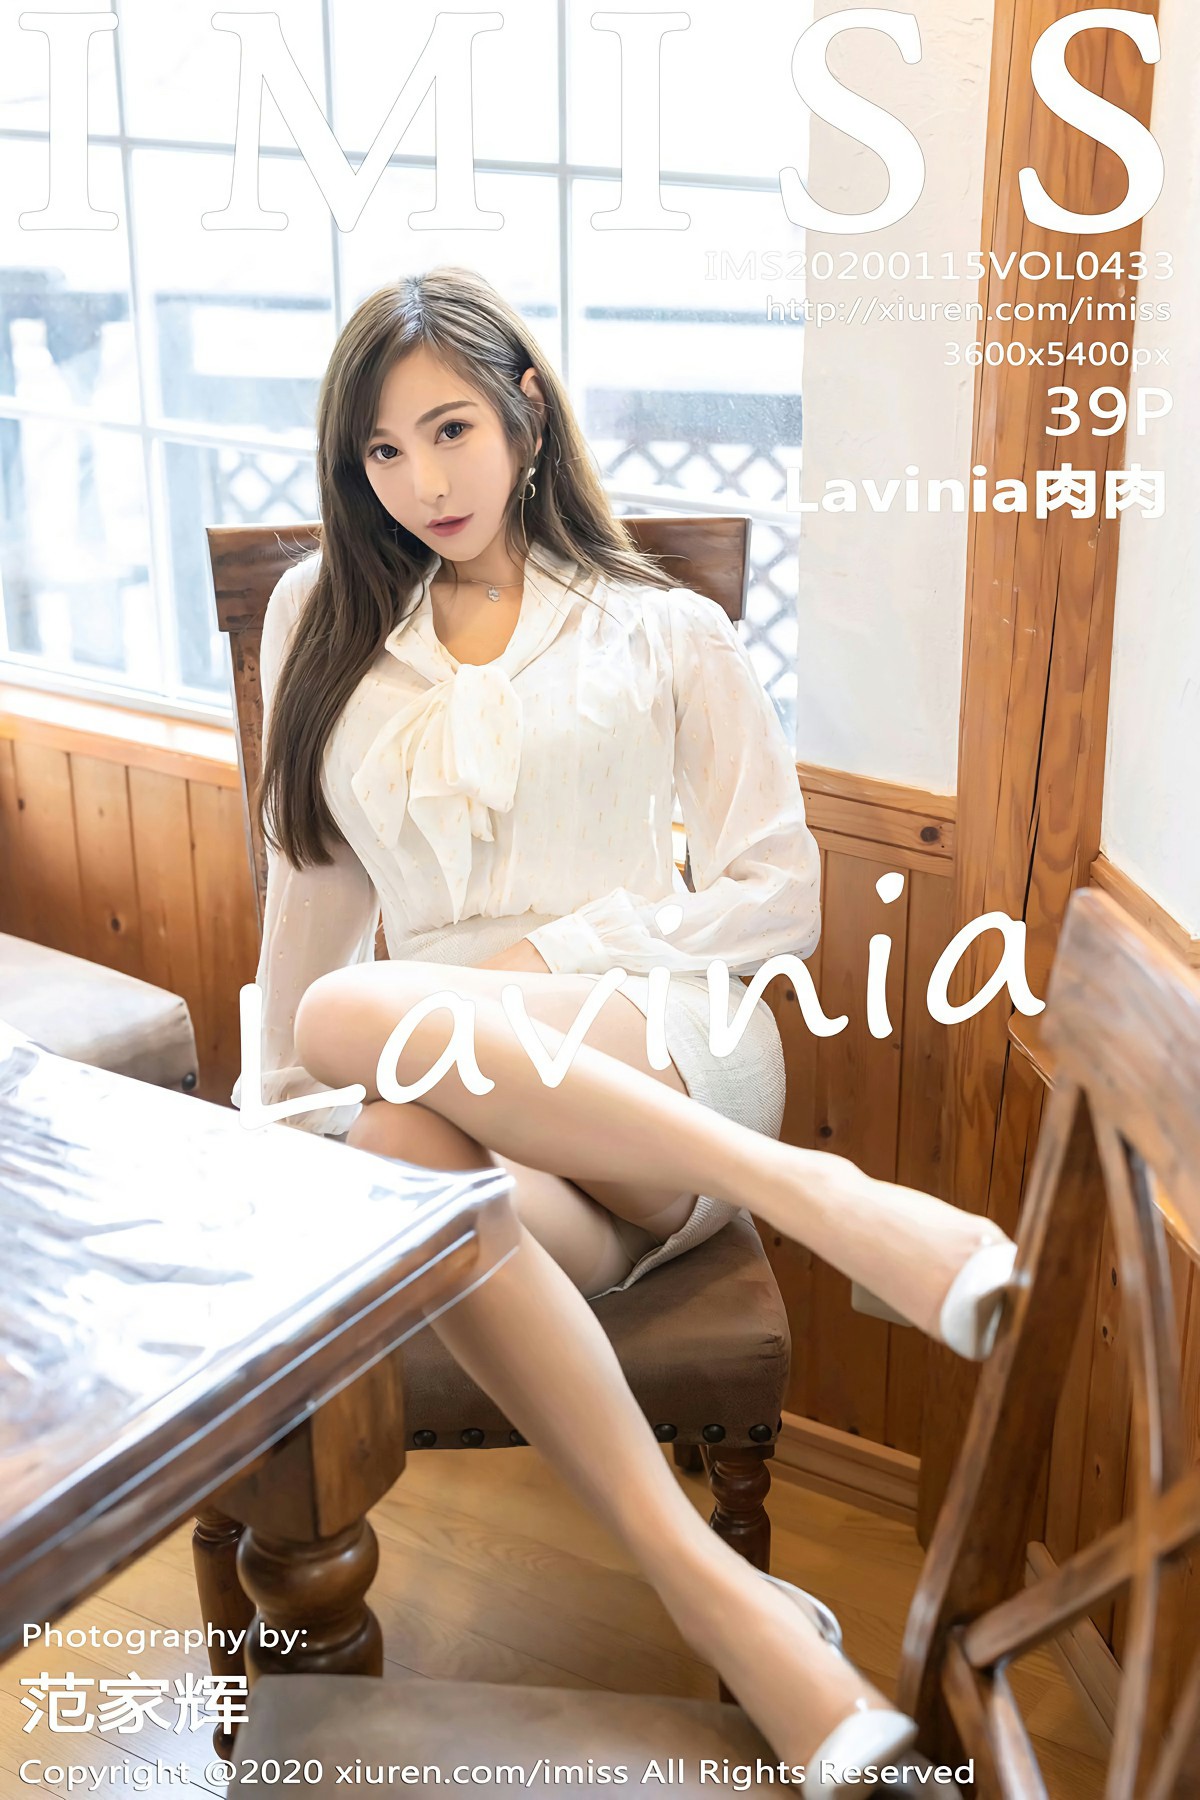 [IMISS爱蜜社]2020.01.15 VOL.433 <strong>Lavinia肉肉</strong>